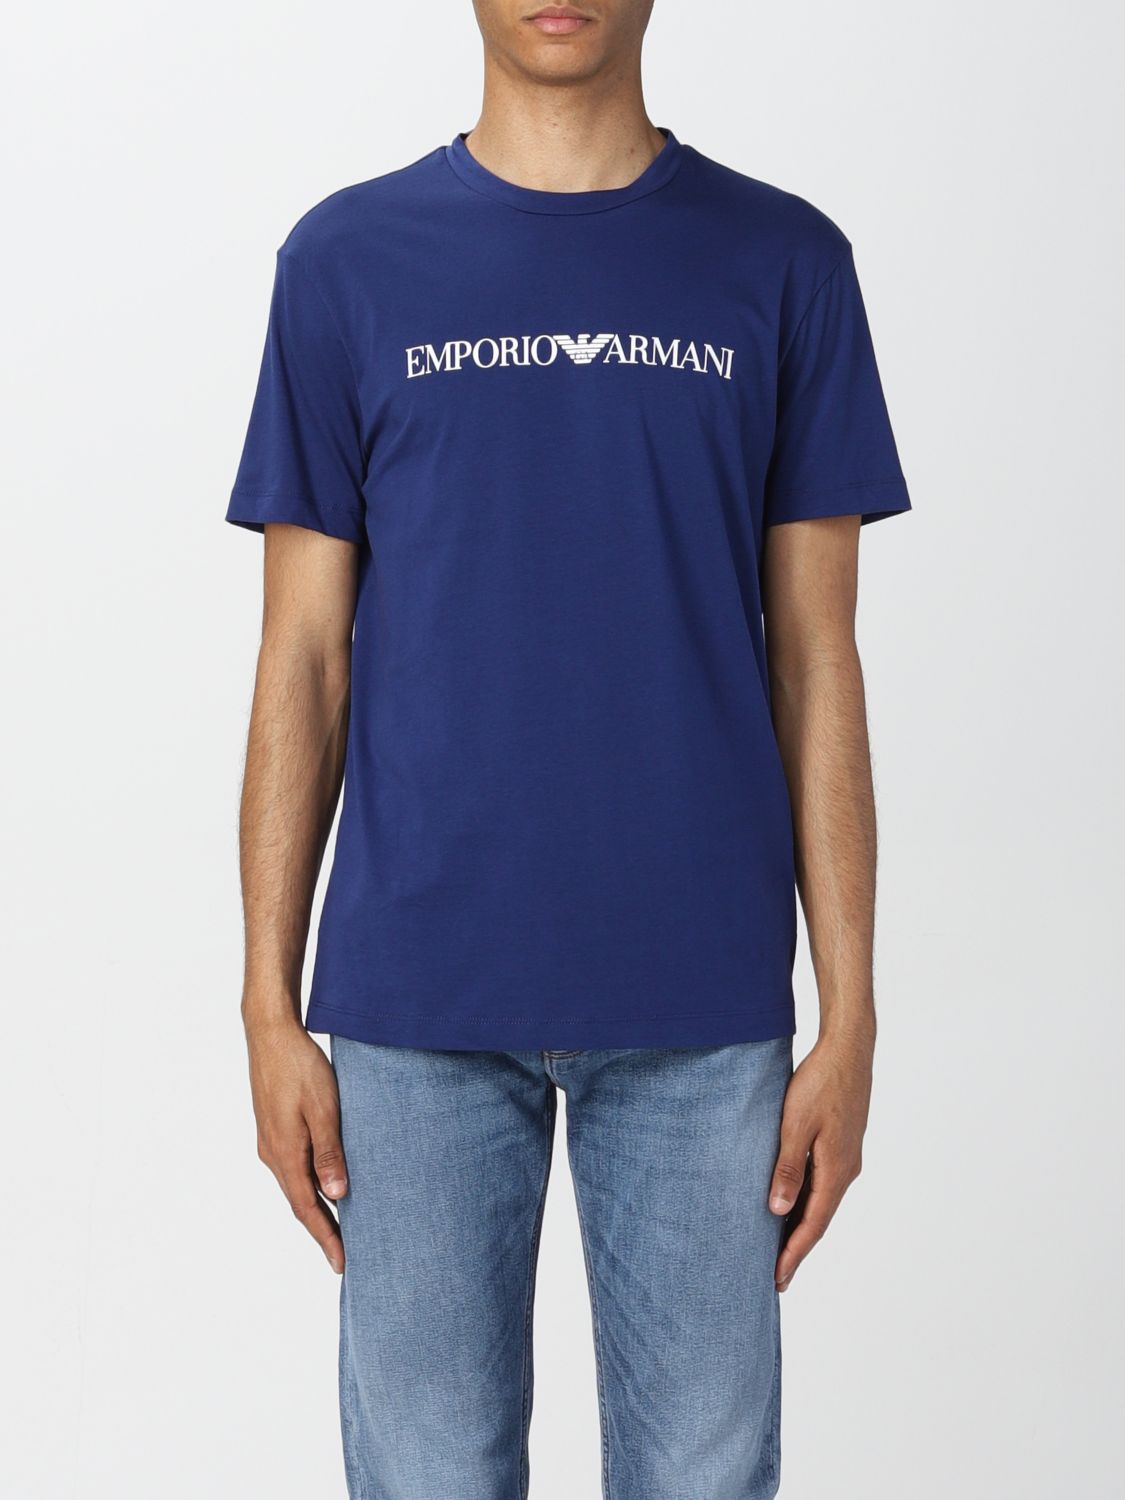 Emporio Armani Cotton T-shirt In Gnawed Blue